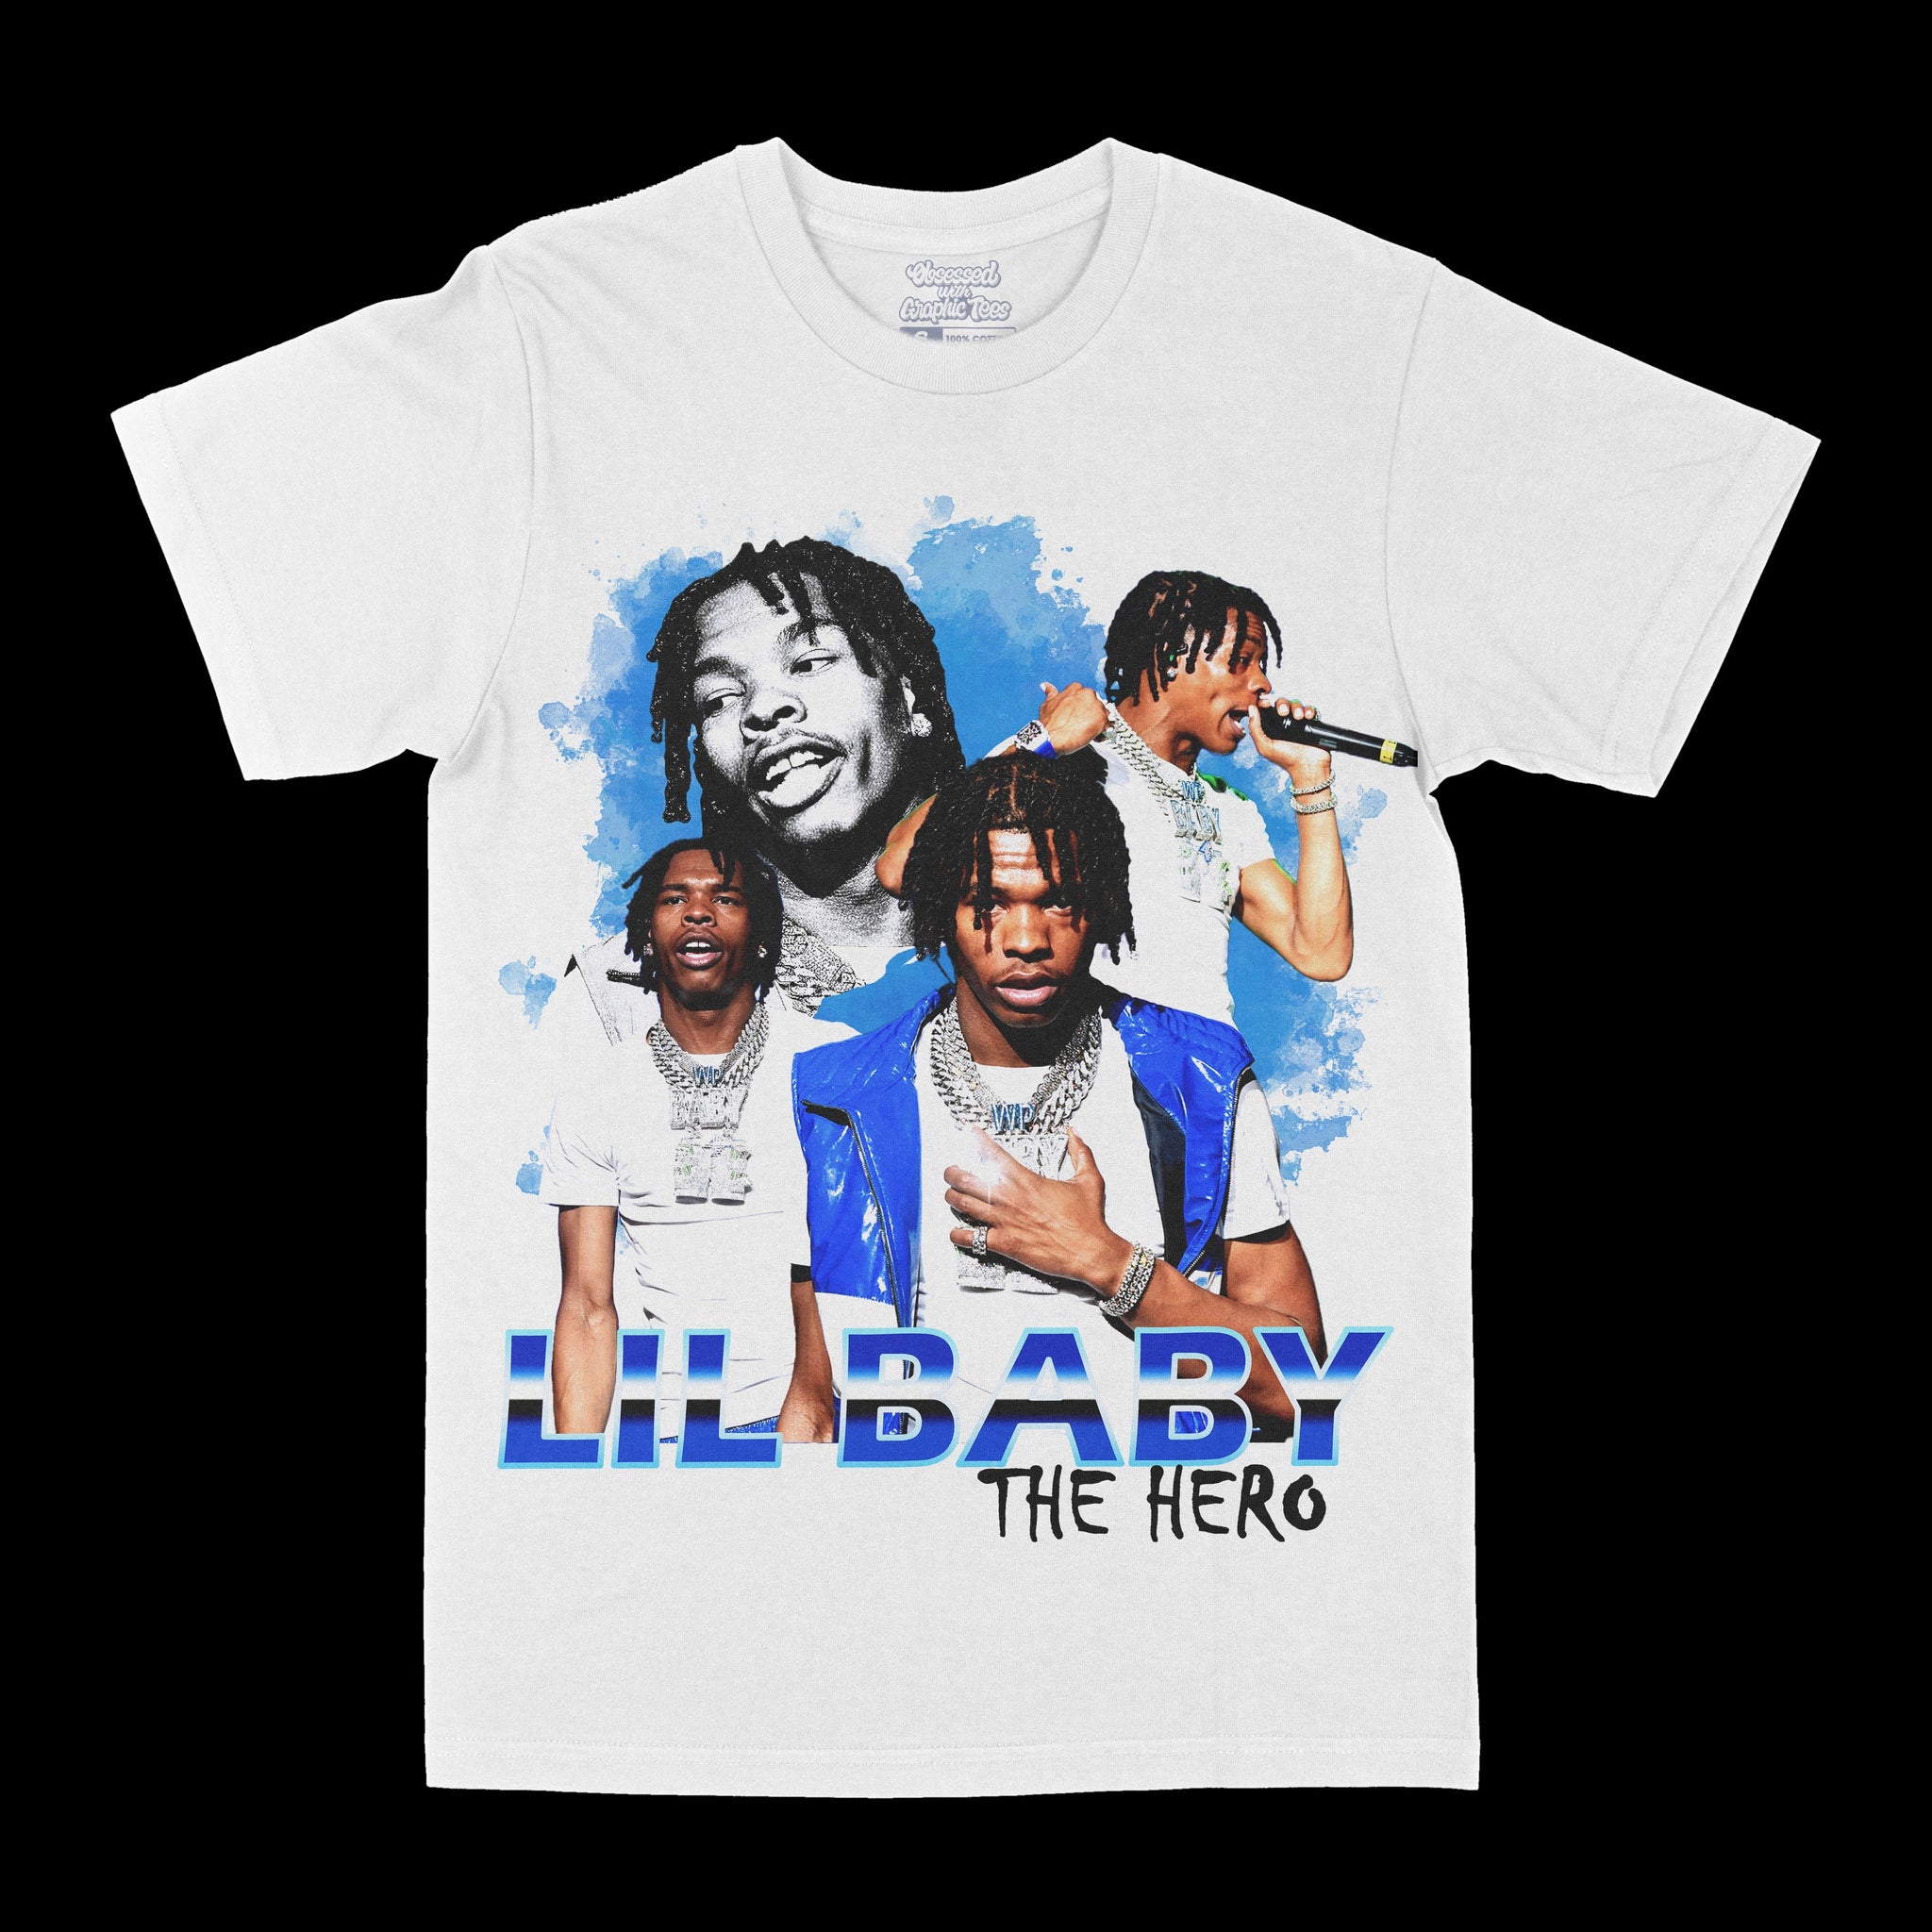 Lil Baby "The Hero" Graphic Tee